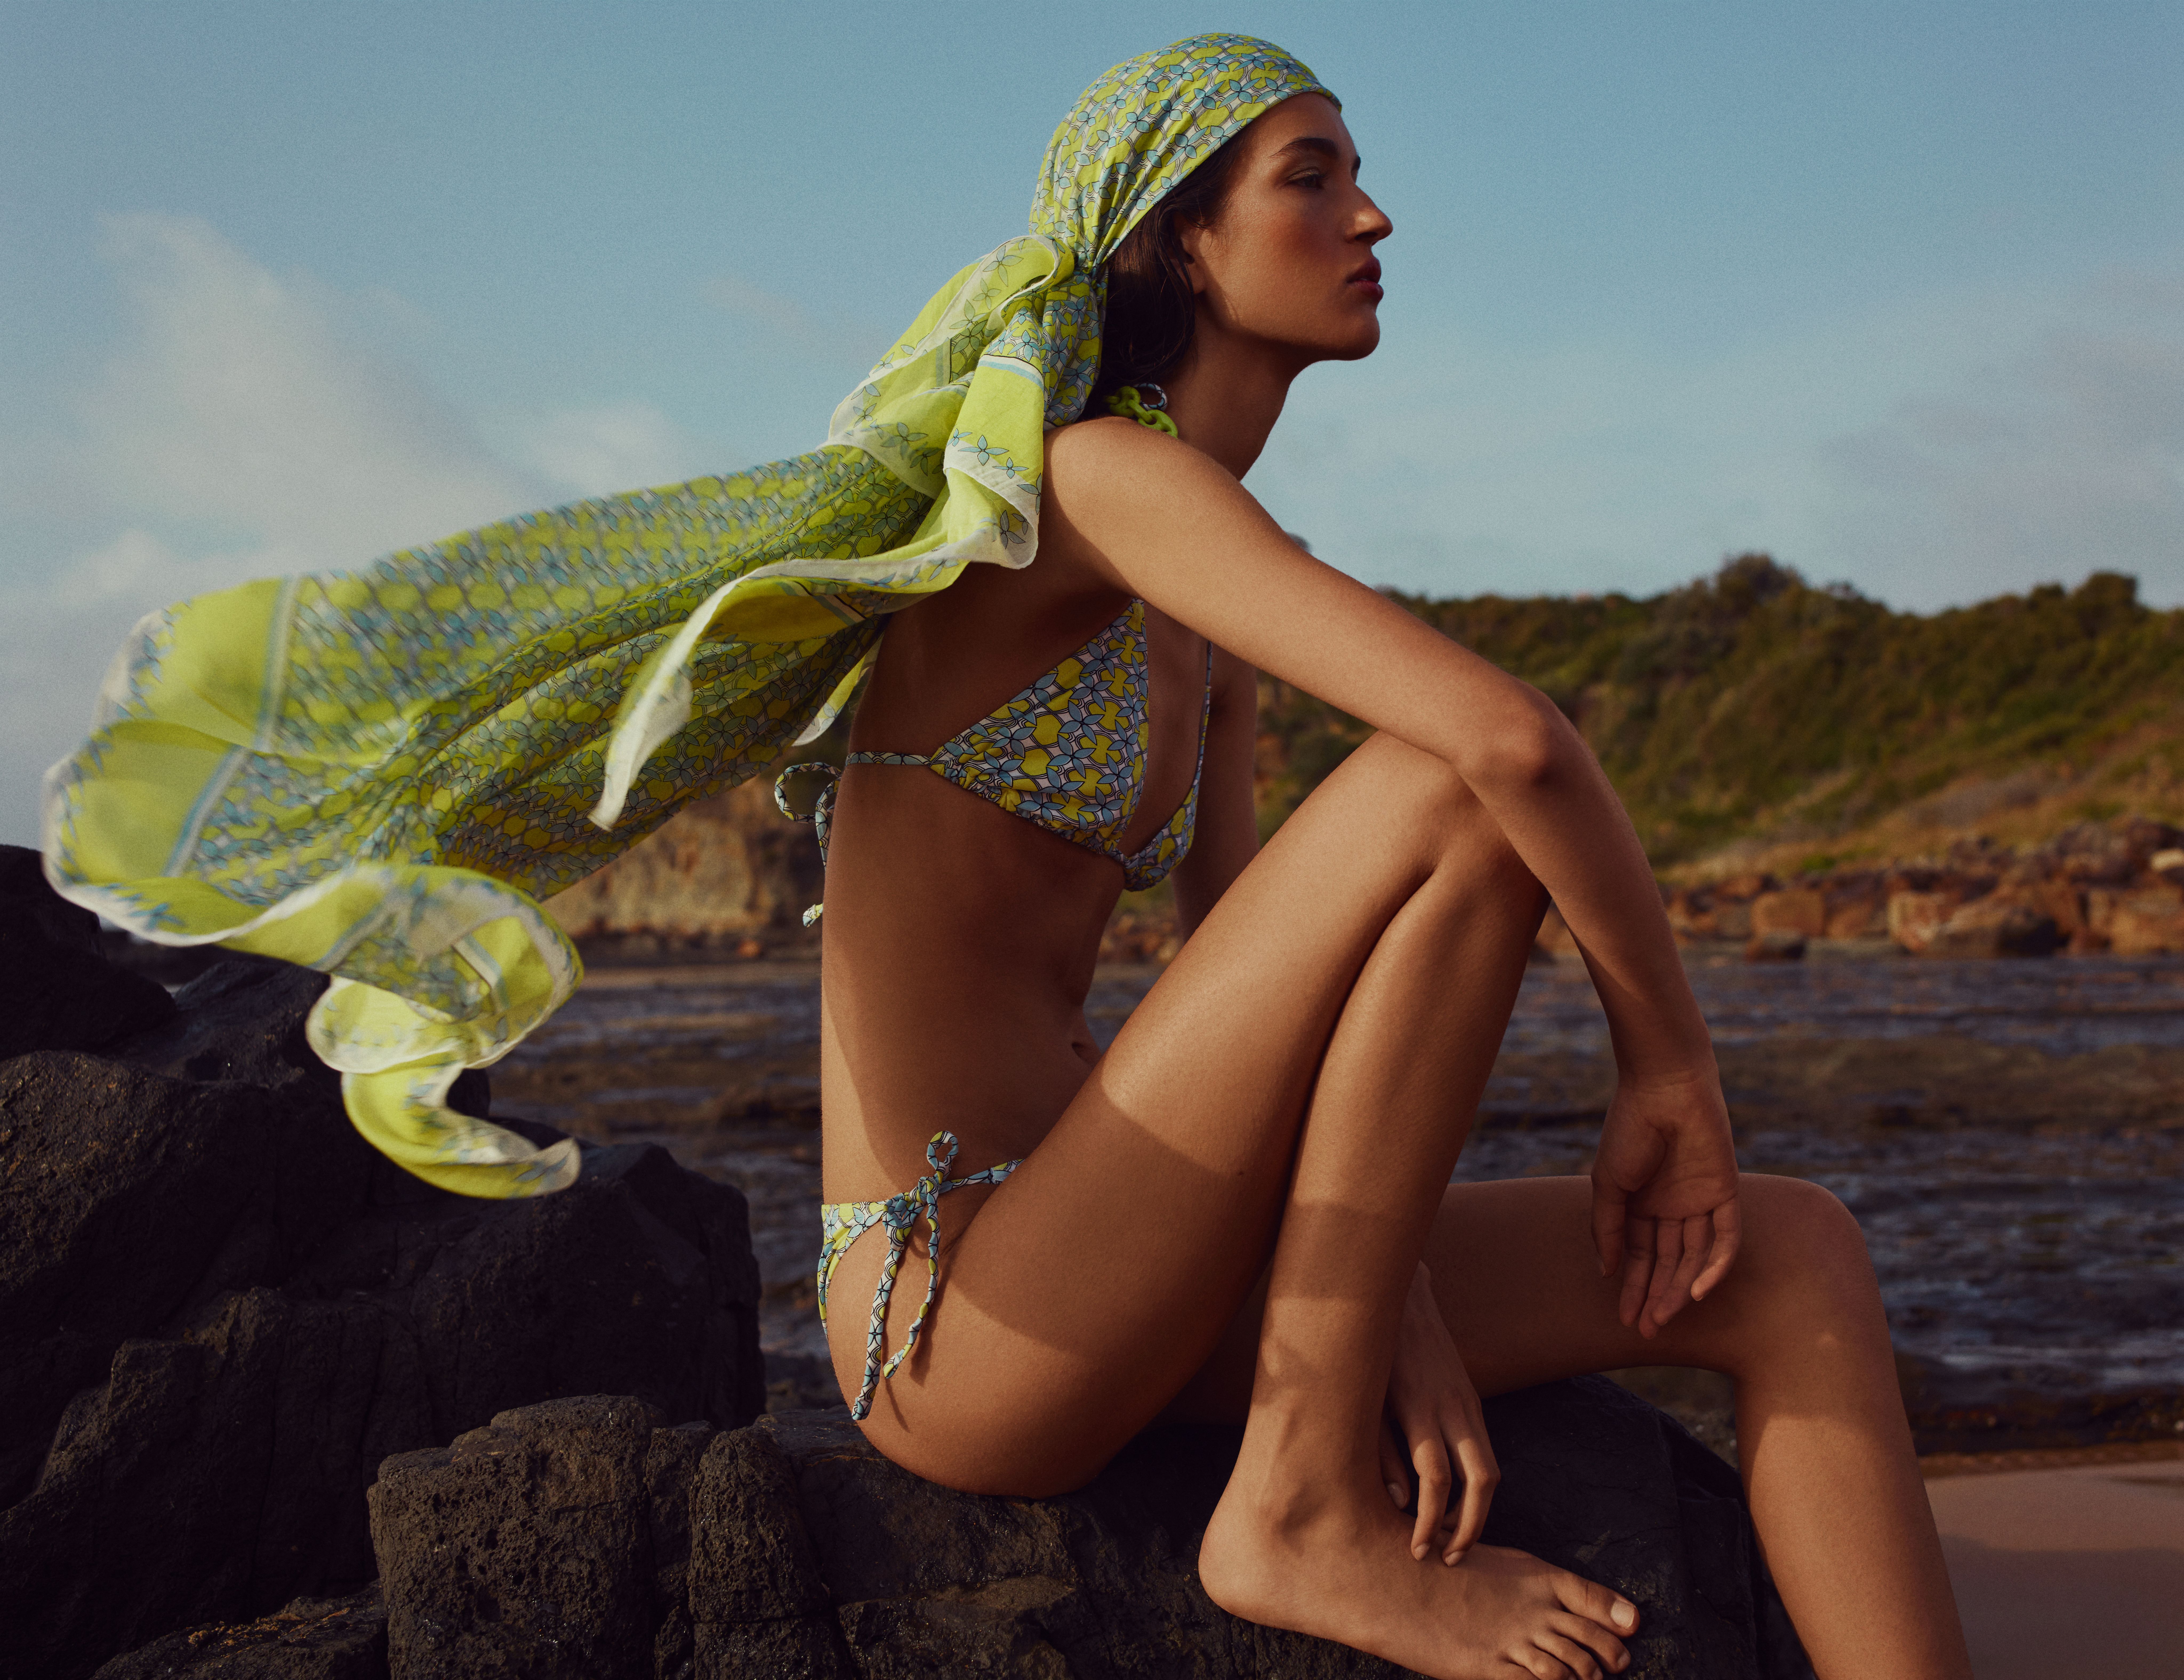 Model sitting facing the side wearing a green and blue bikini and scarf sitting on rocks with the ocean in the background